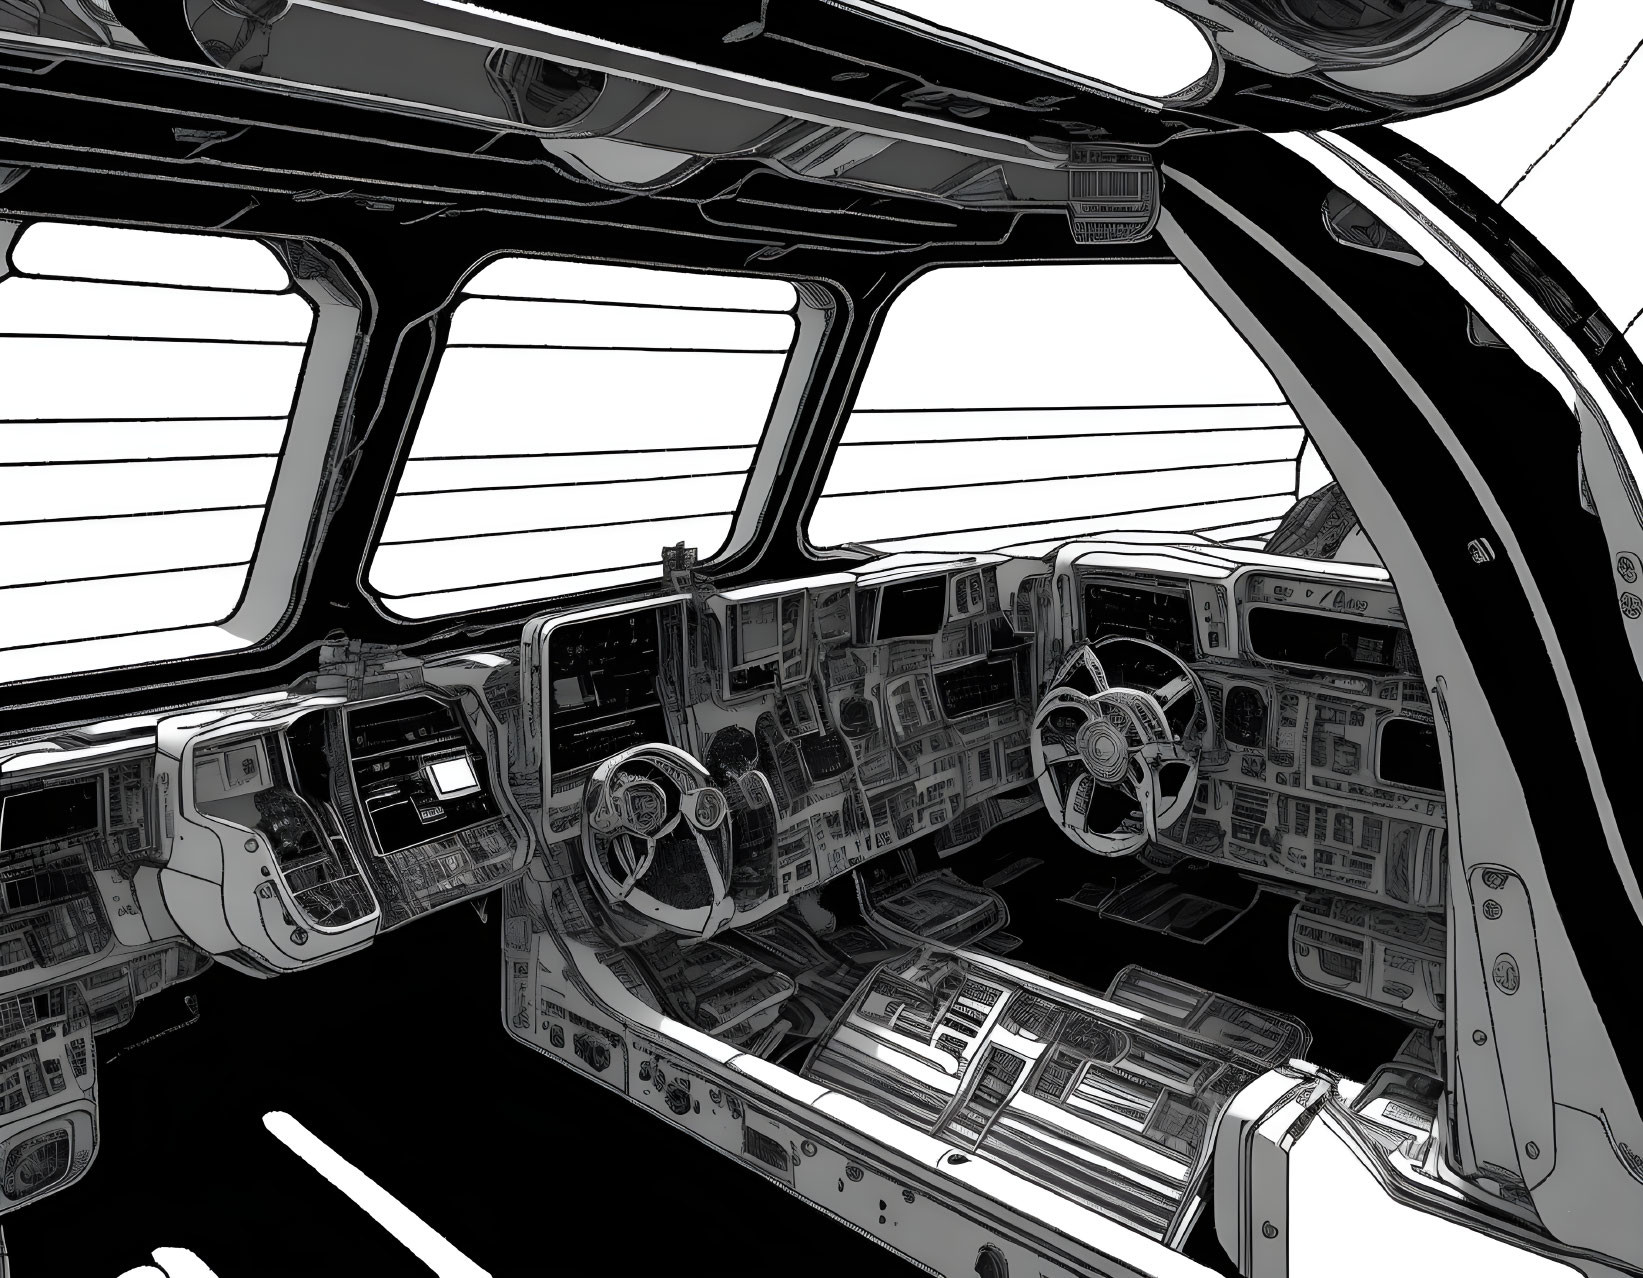 Detailed Line Drawing of Spacecraft Cockpit with Control Wheels, Panels, Switches, Screens, and